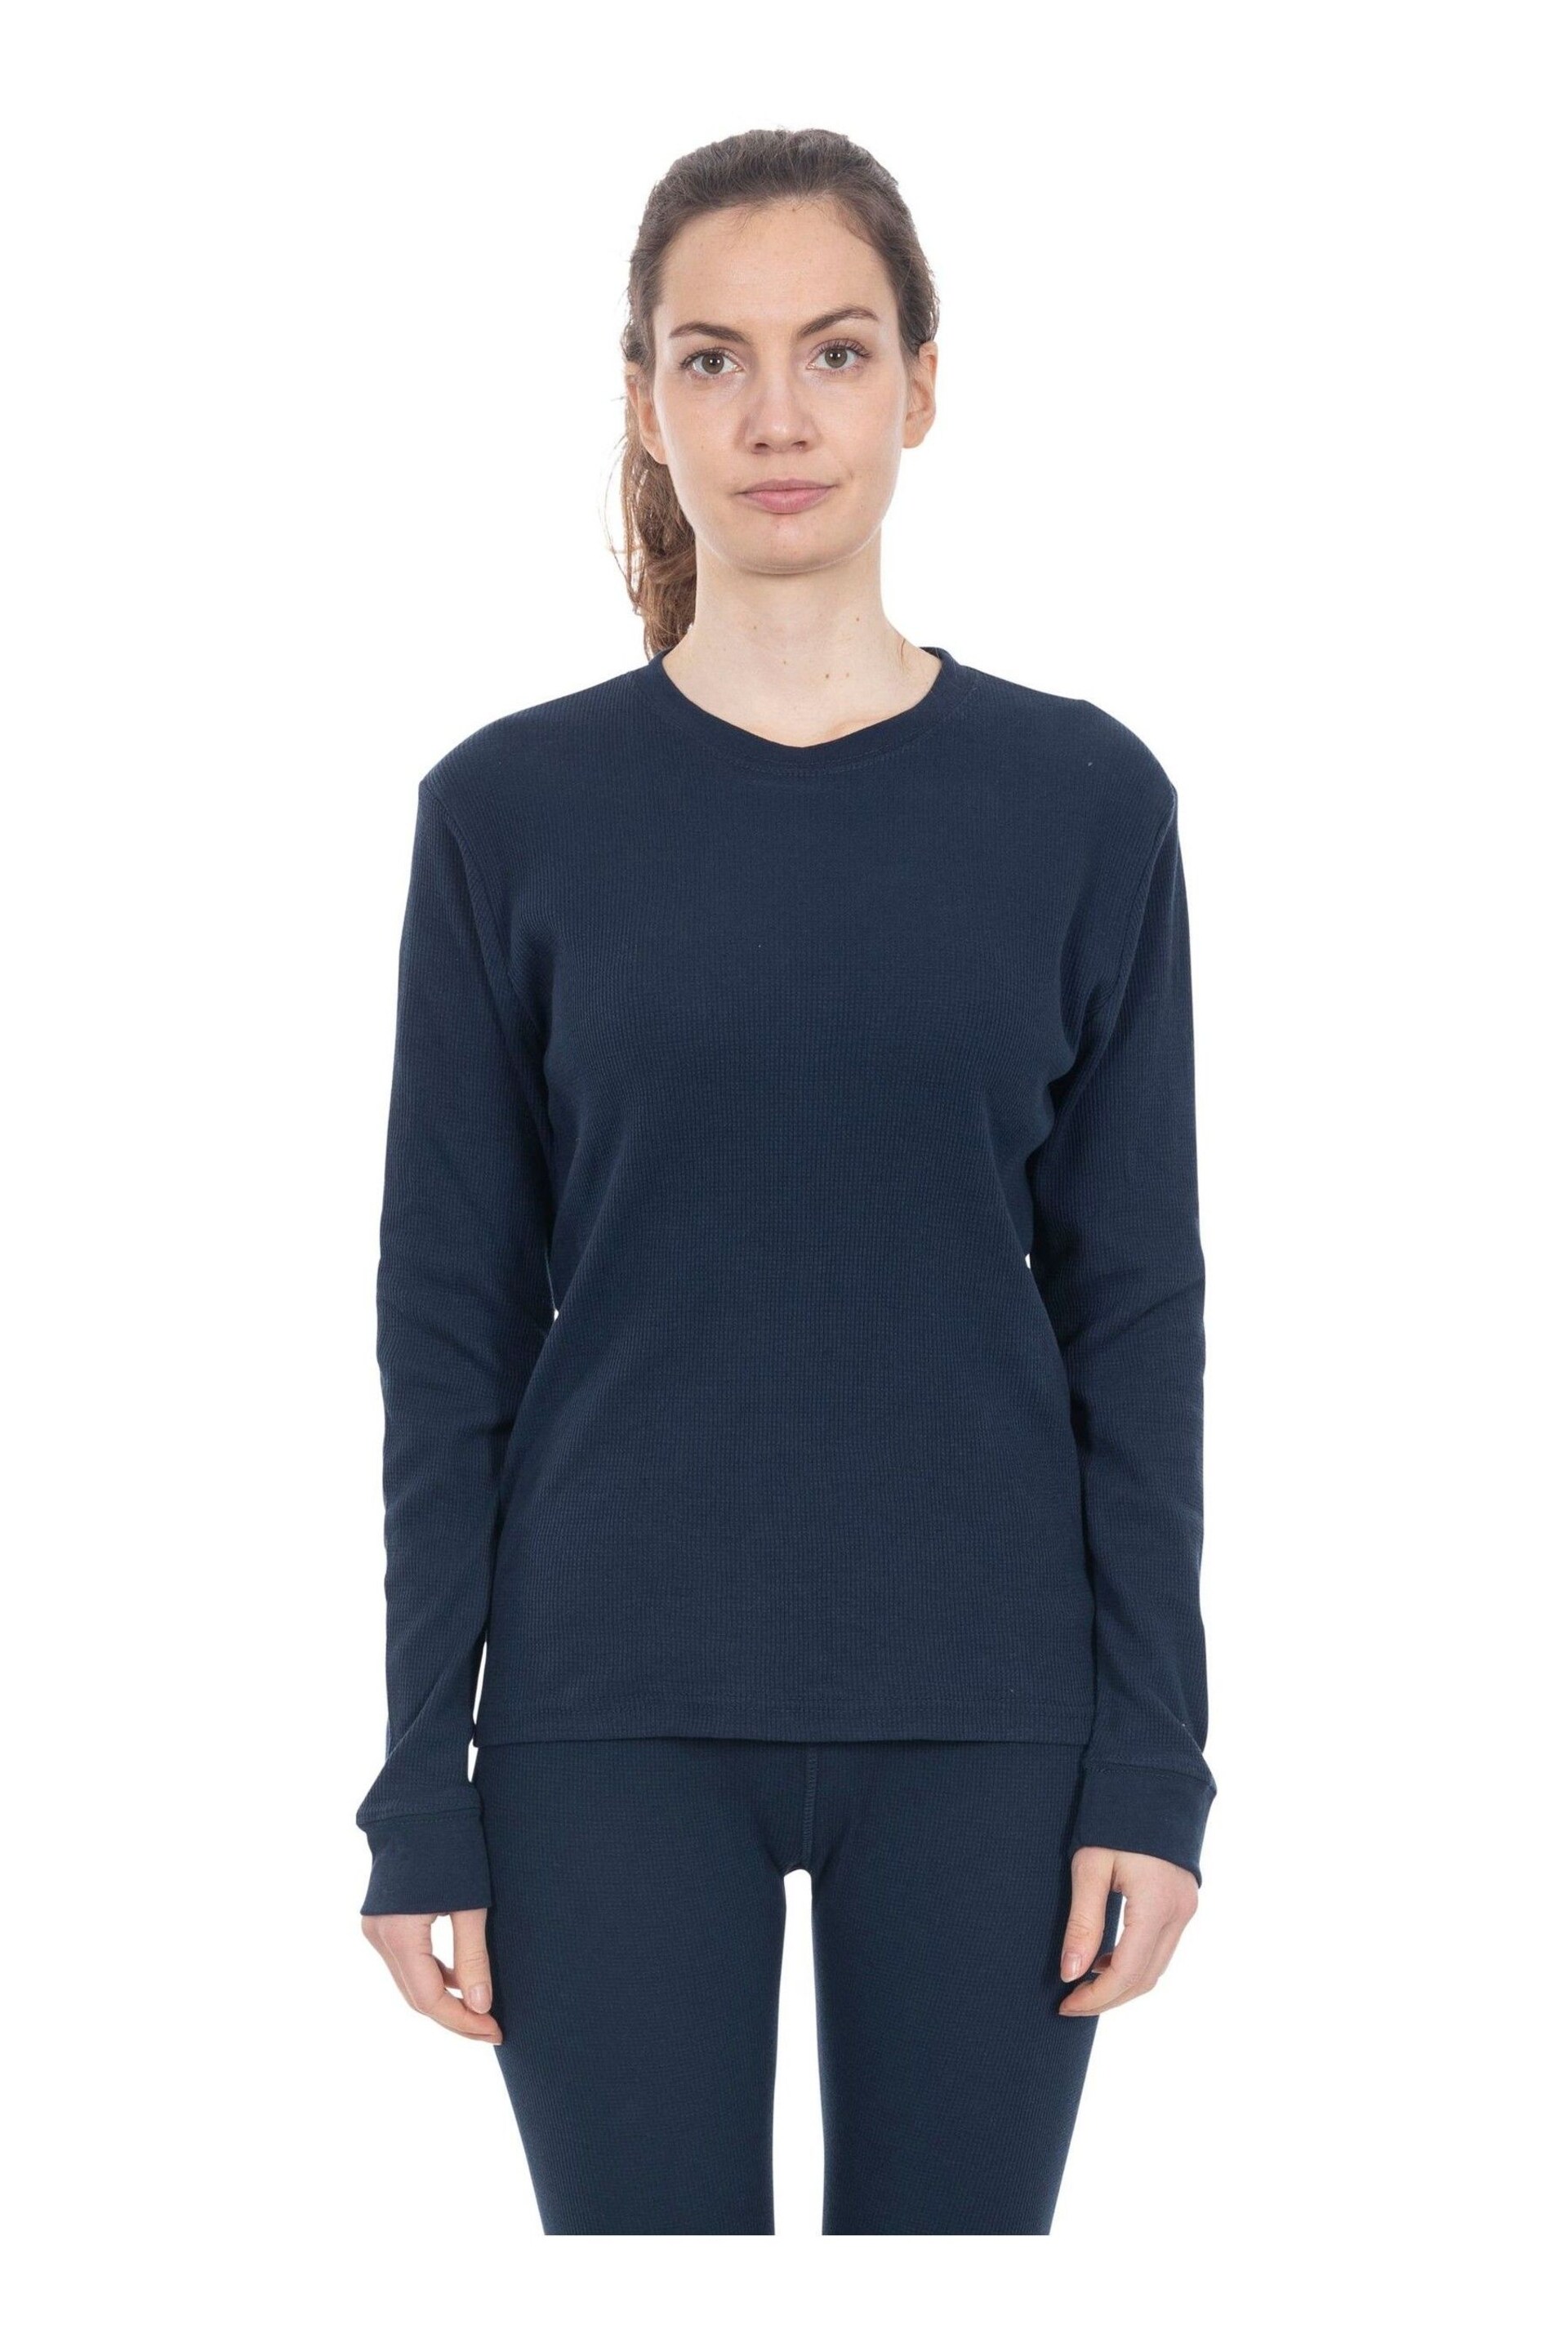 Trespass Blue Mystery Thermal Base Layer Set - Image 2 of 7